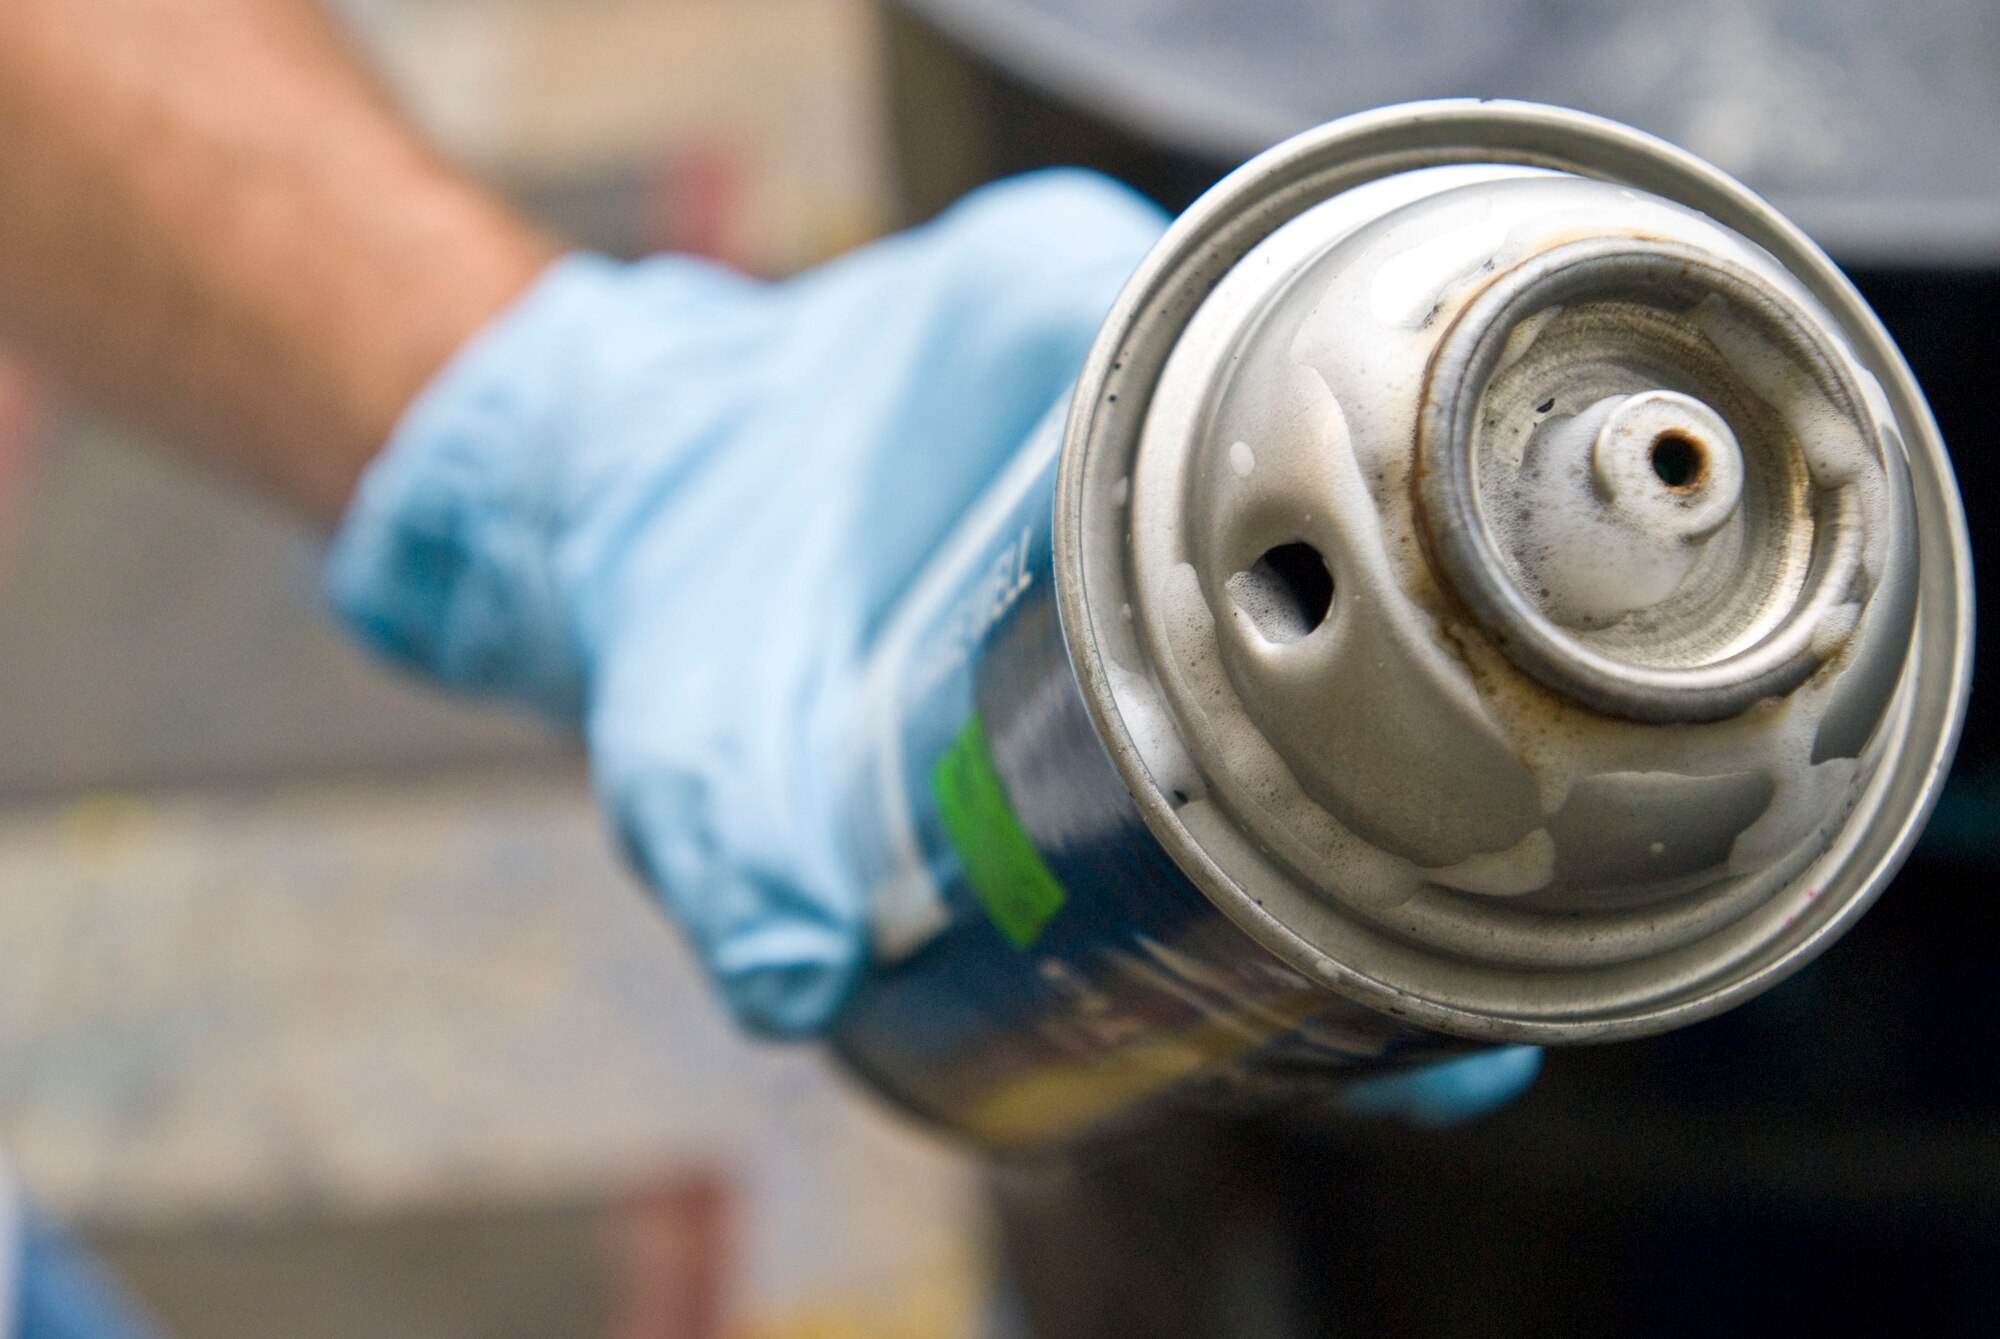 Bill Barrett, 19th Civil Engineer Squadron environmental protection assistant, holds up an empty aerosol can with a punched hole Aug. 12. Punching holes in aerosol cans relieves the pressure and renders them non-hazardous and recyclable. (U.S. Air Force photo by Staff Sgt. Nestor Cruz)